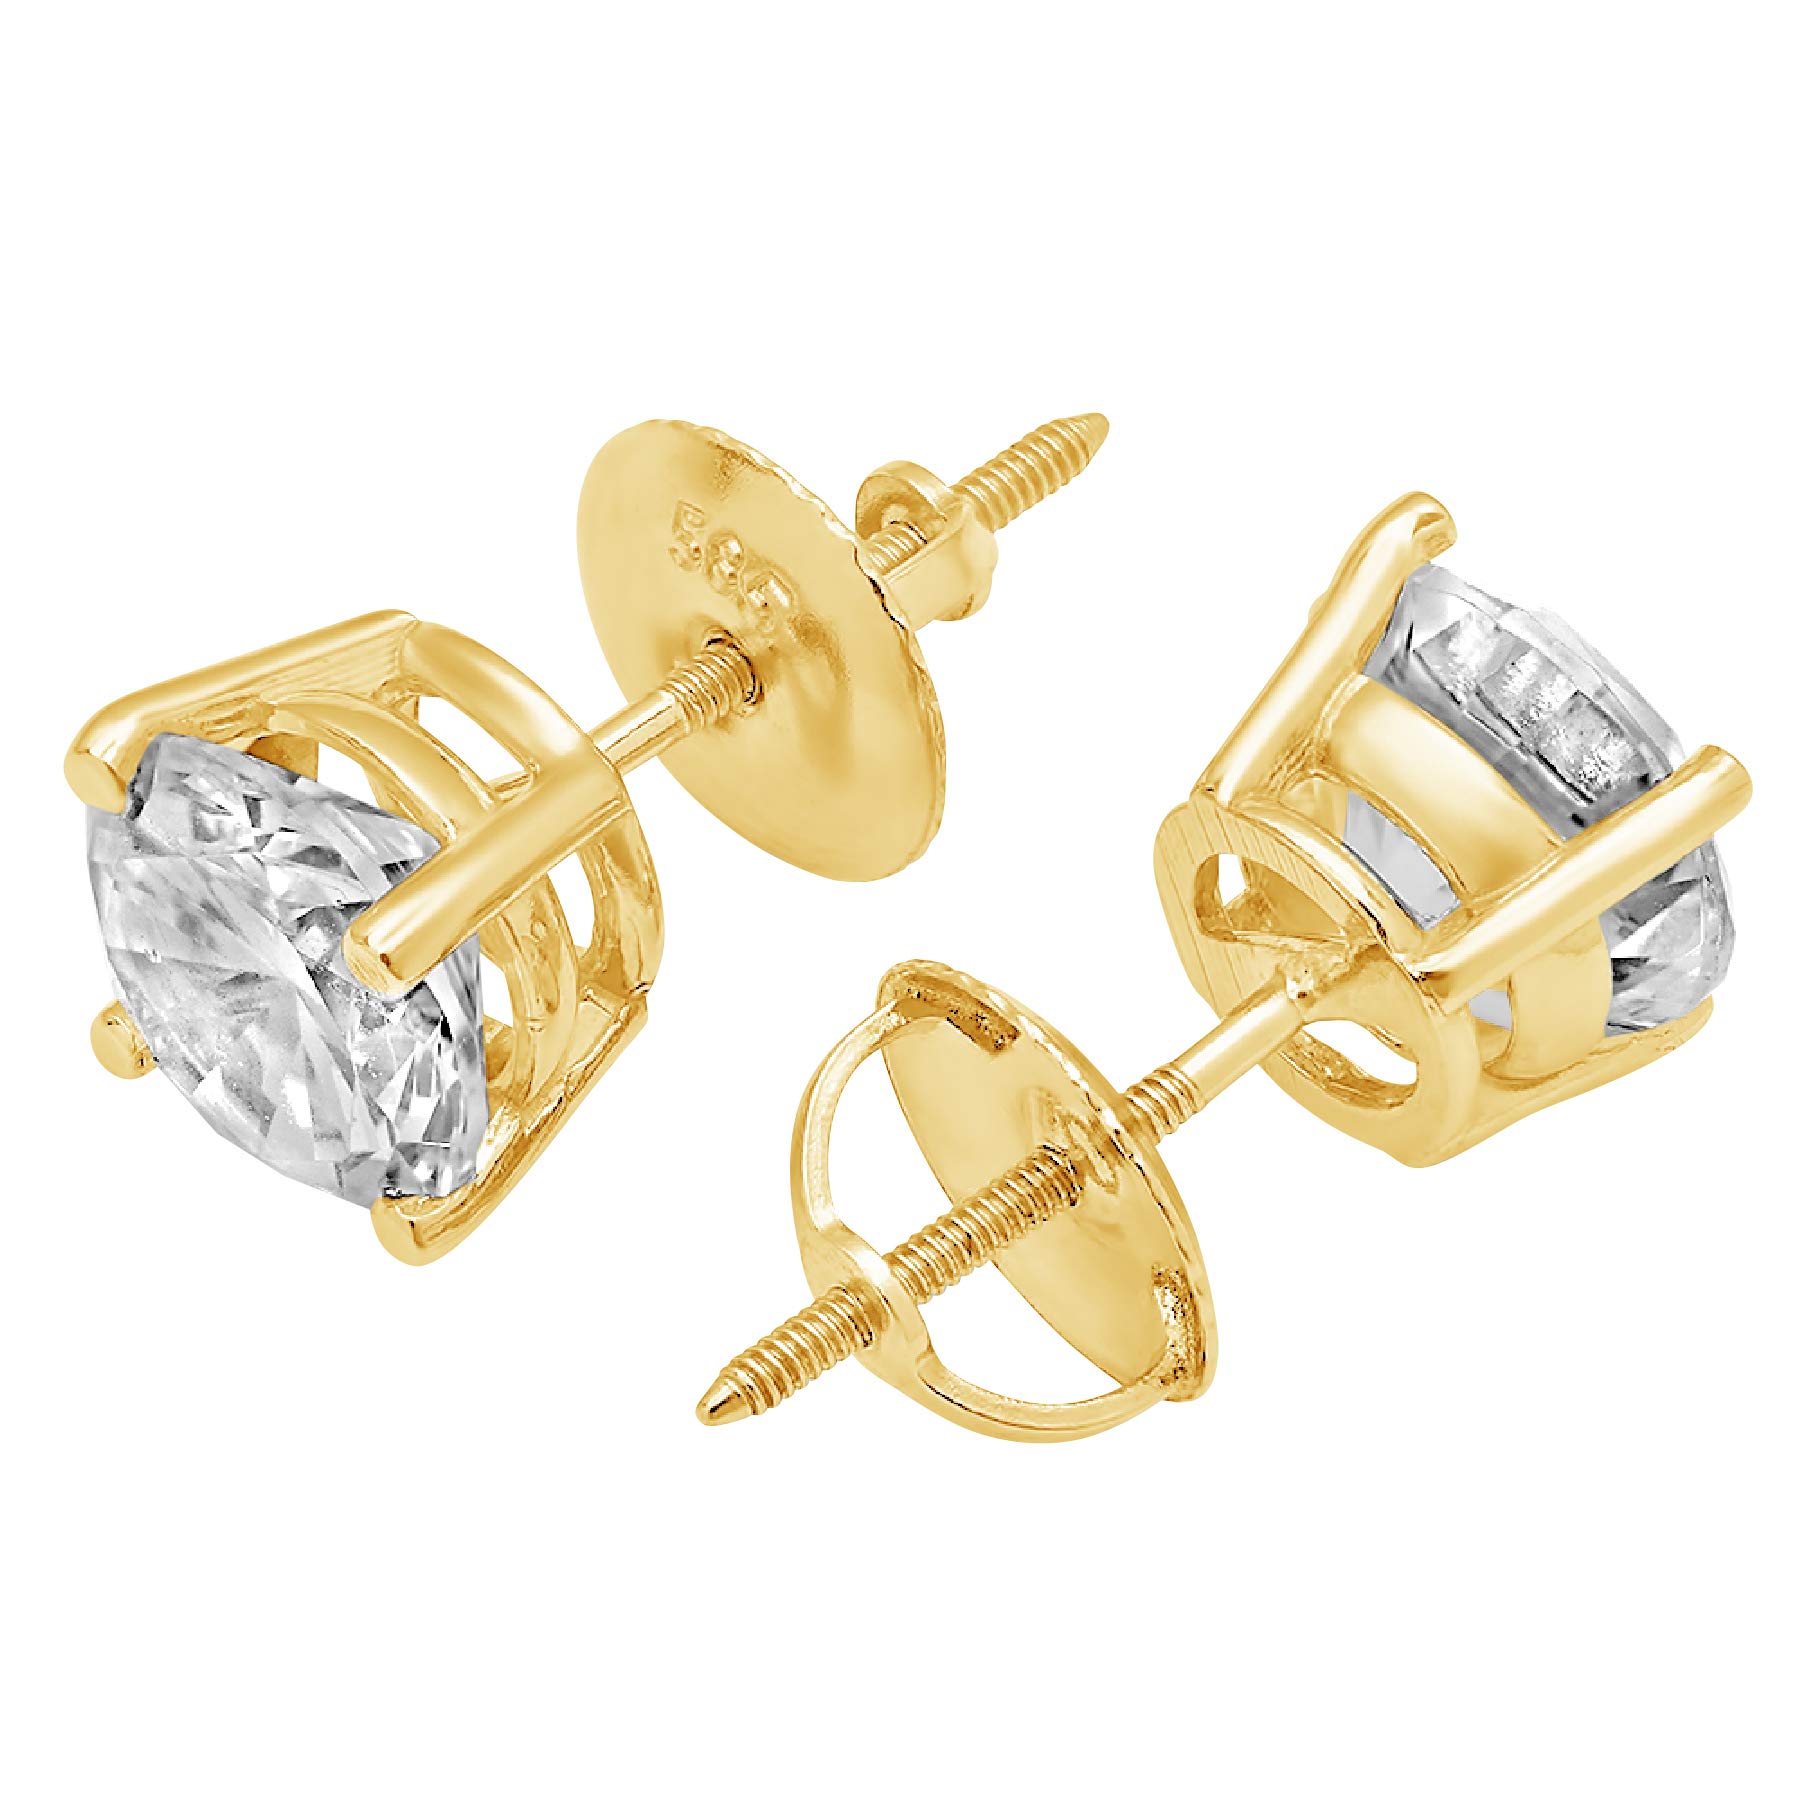 Clara Pucci 2.0 ct Brilliant Round Cut Solitaire Studs with Clear Moissanite - VVS1 and Color D Crystal Stone 14K Yellow Gold Pair of Stud Earrings Screw Back